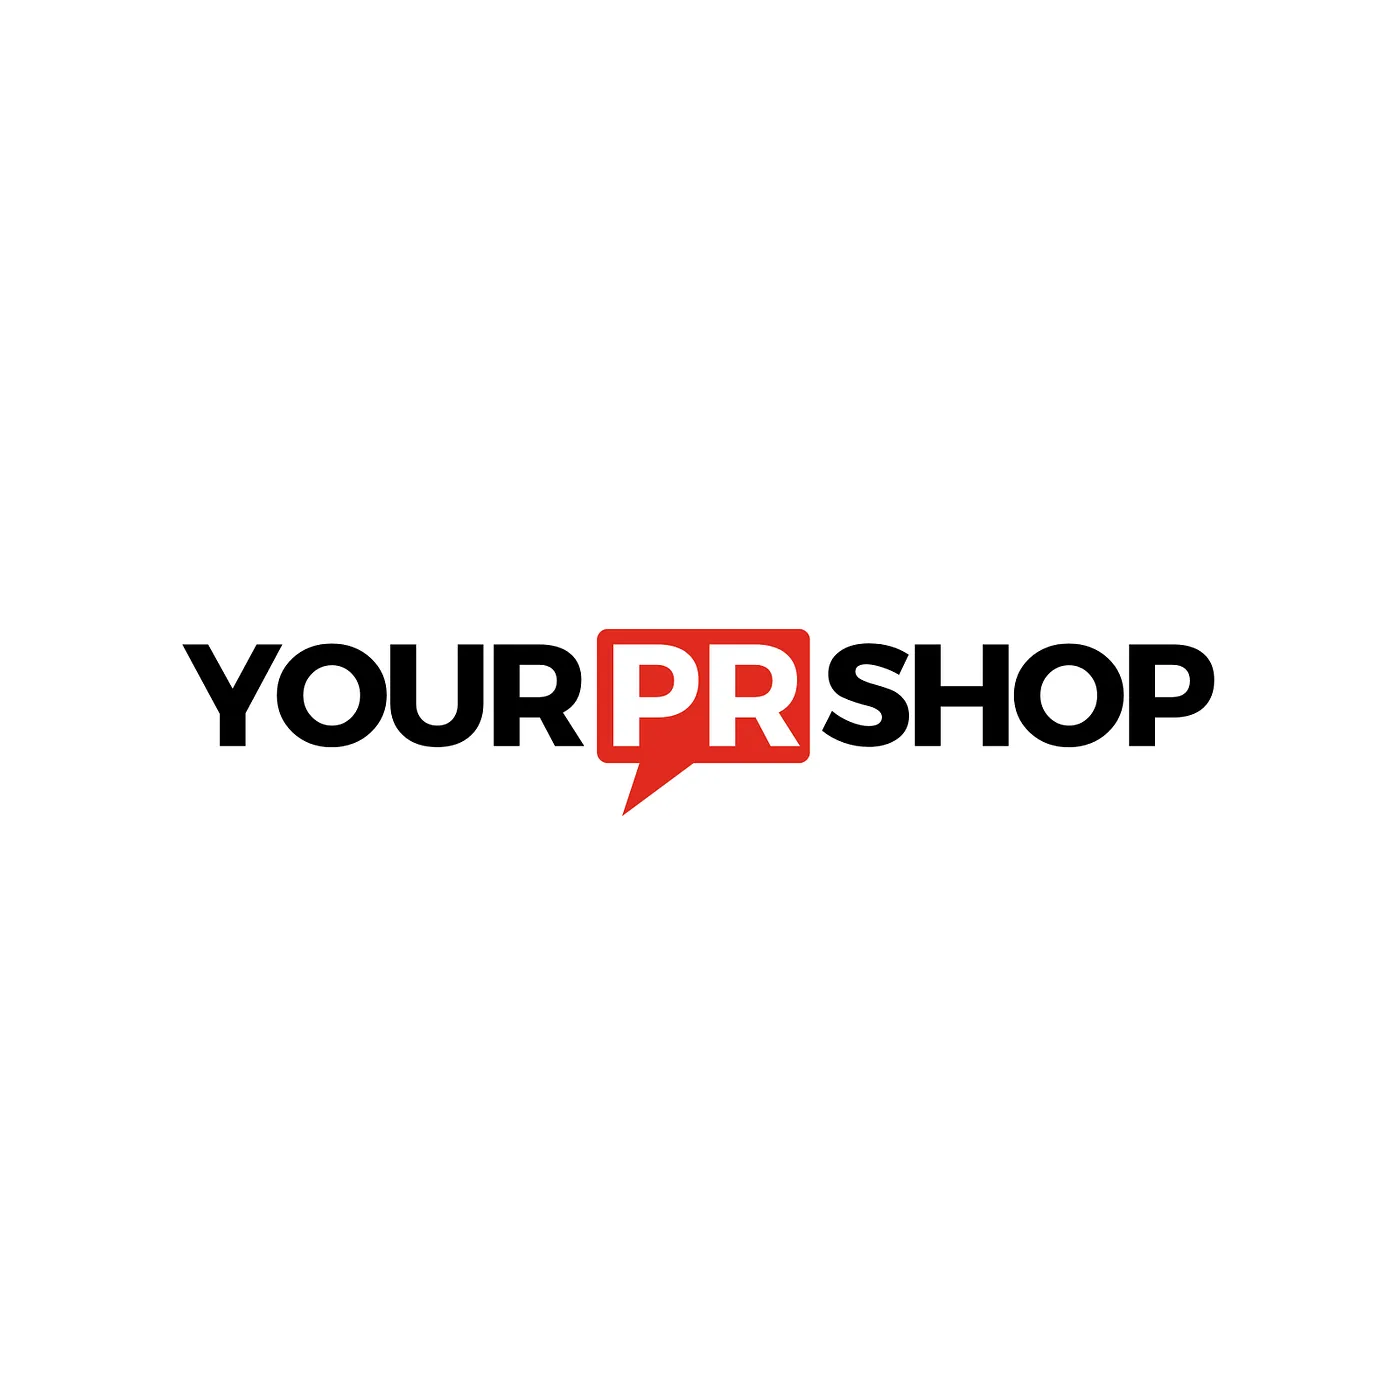 Yourprshop.png